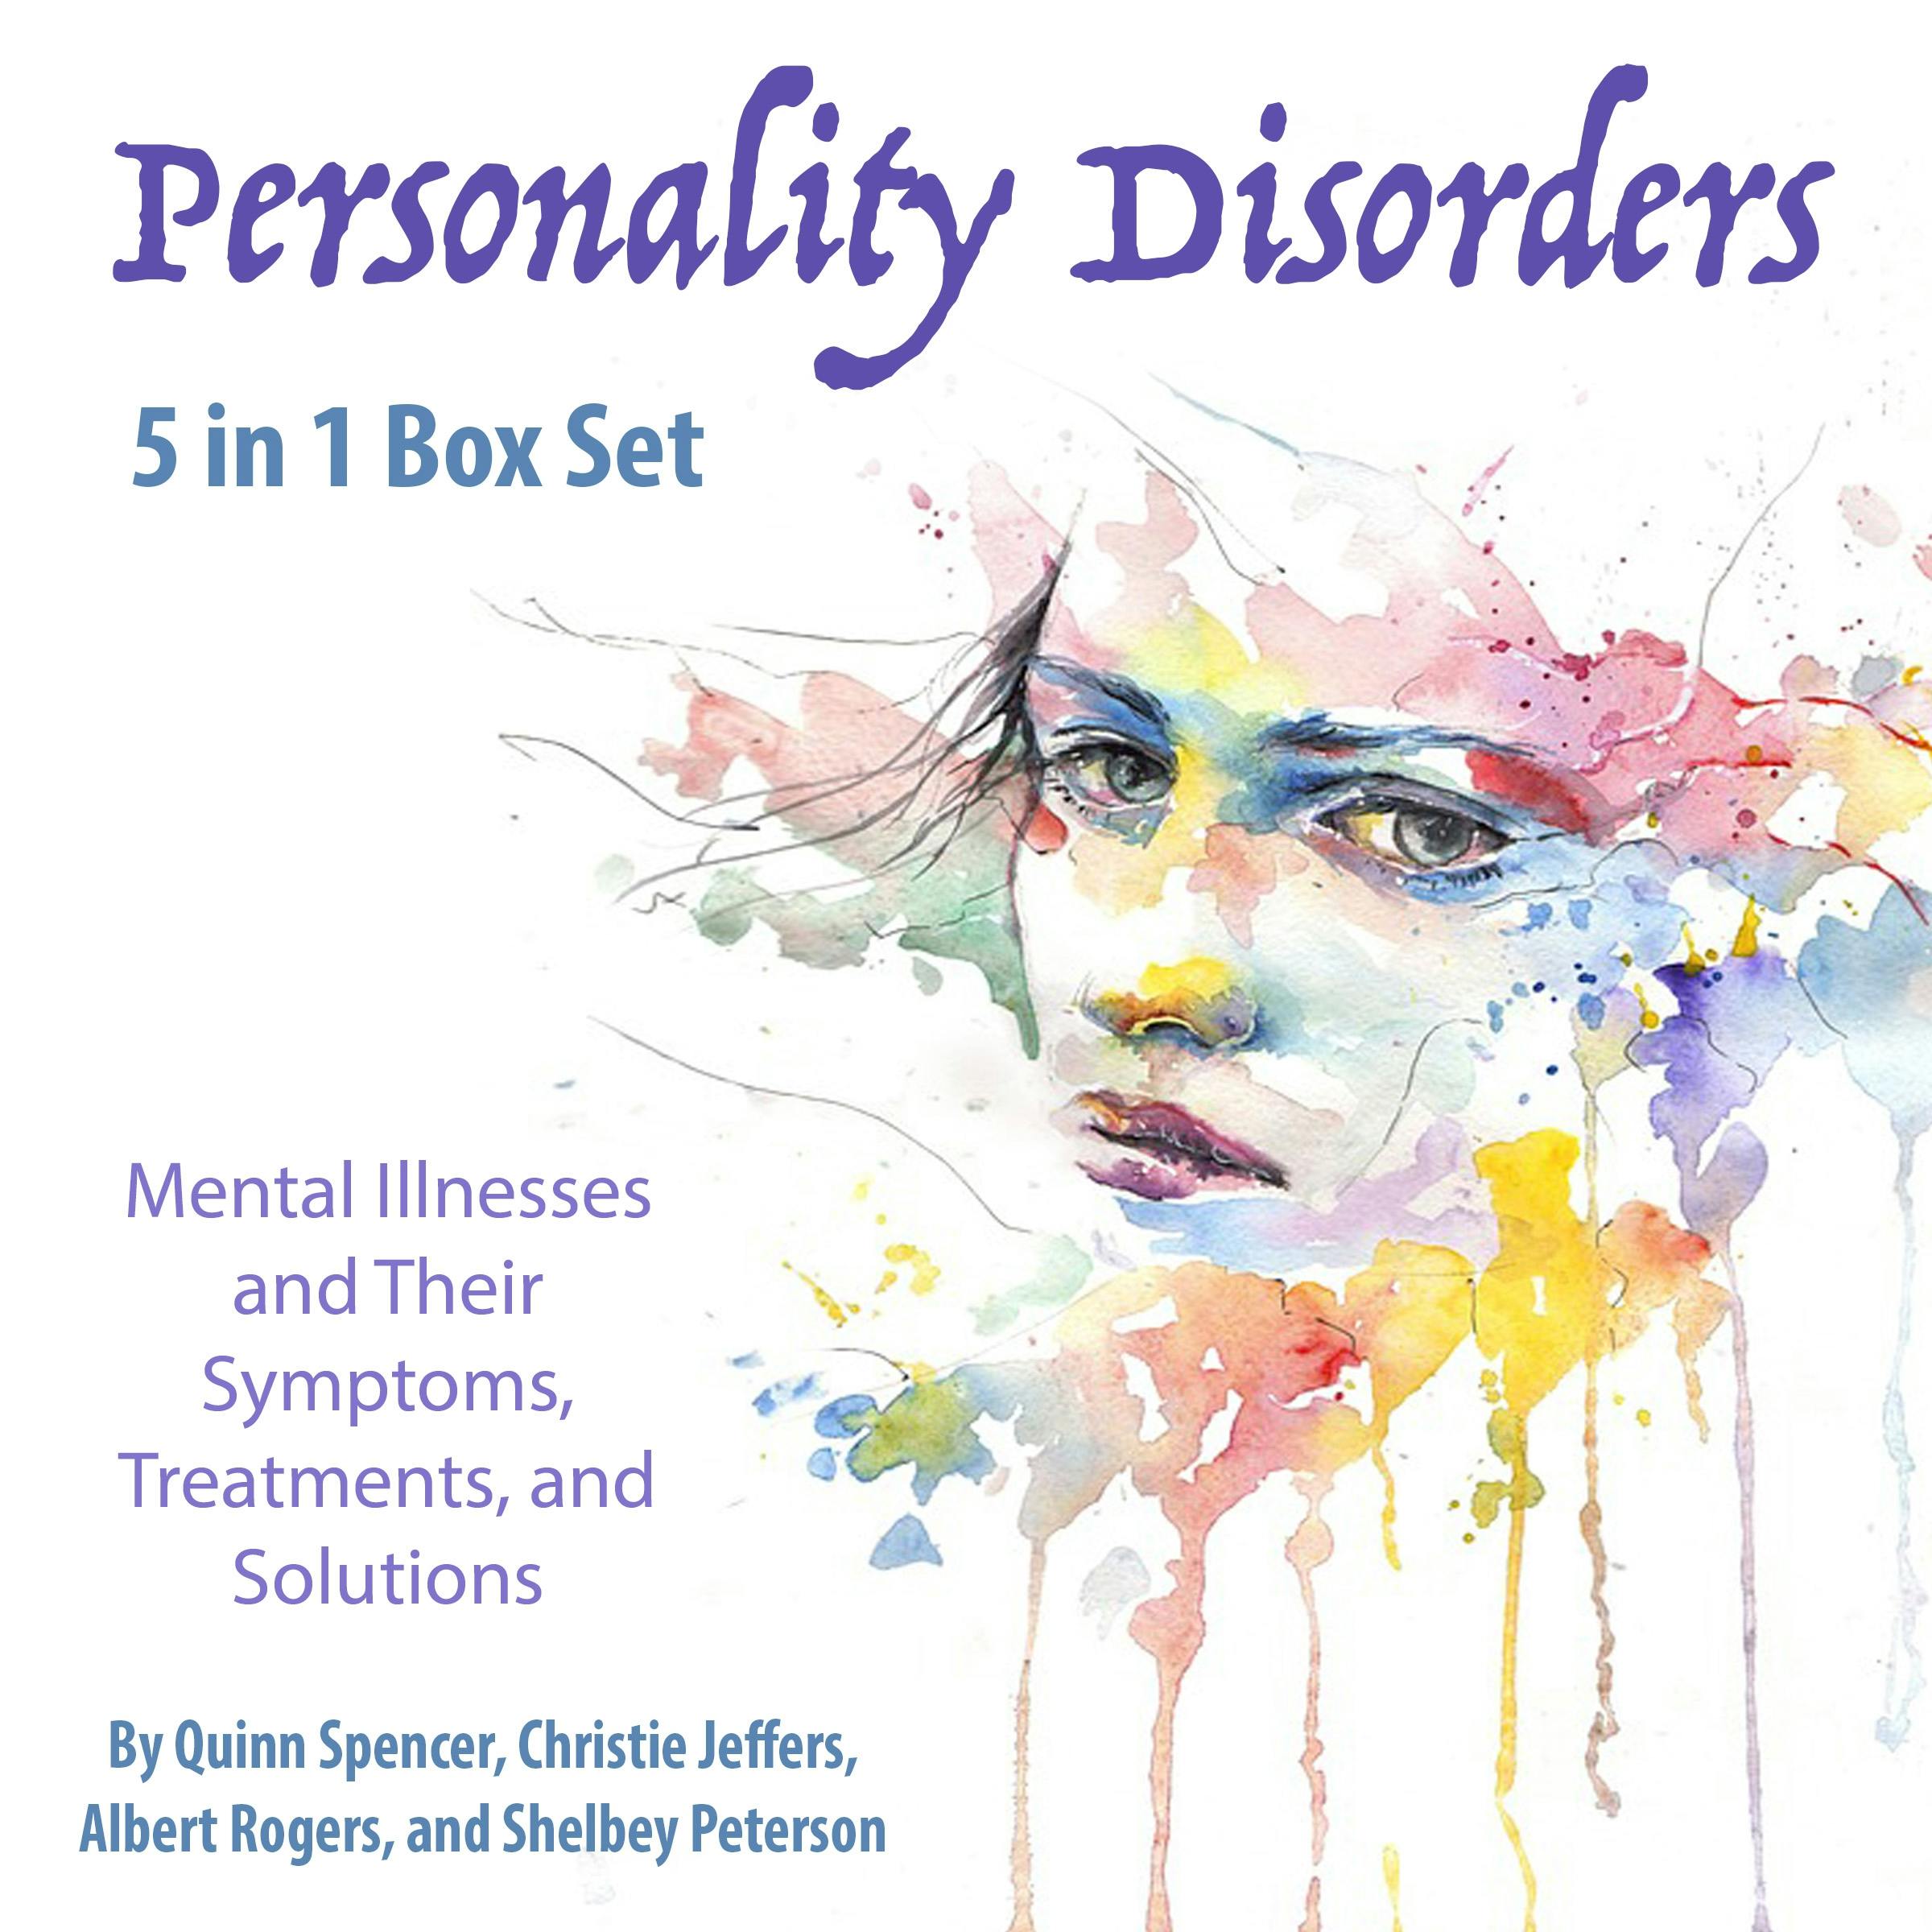 Personality Disorders: Mental Illnesses and Their Symptoms, Treatments, and Solutions - Albert Rogers, Shelbey Peterson, Quinn Spencer, Christie Jeffers